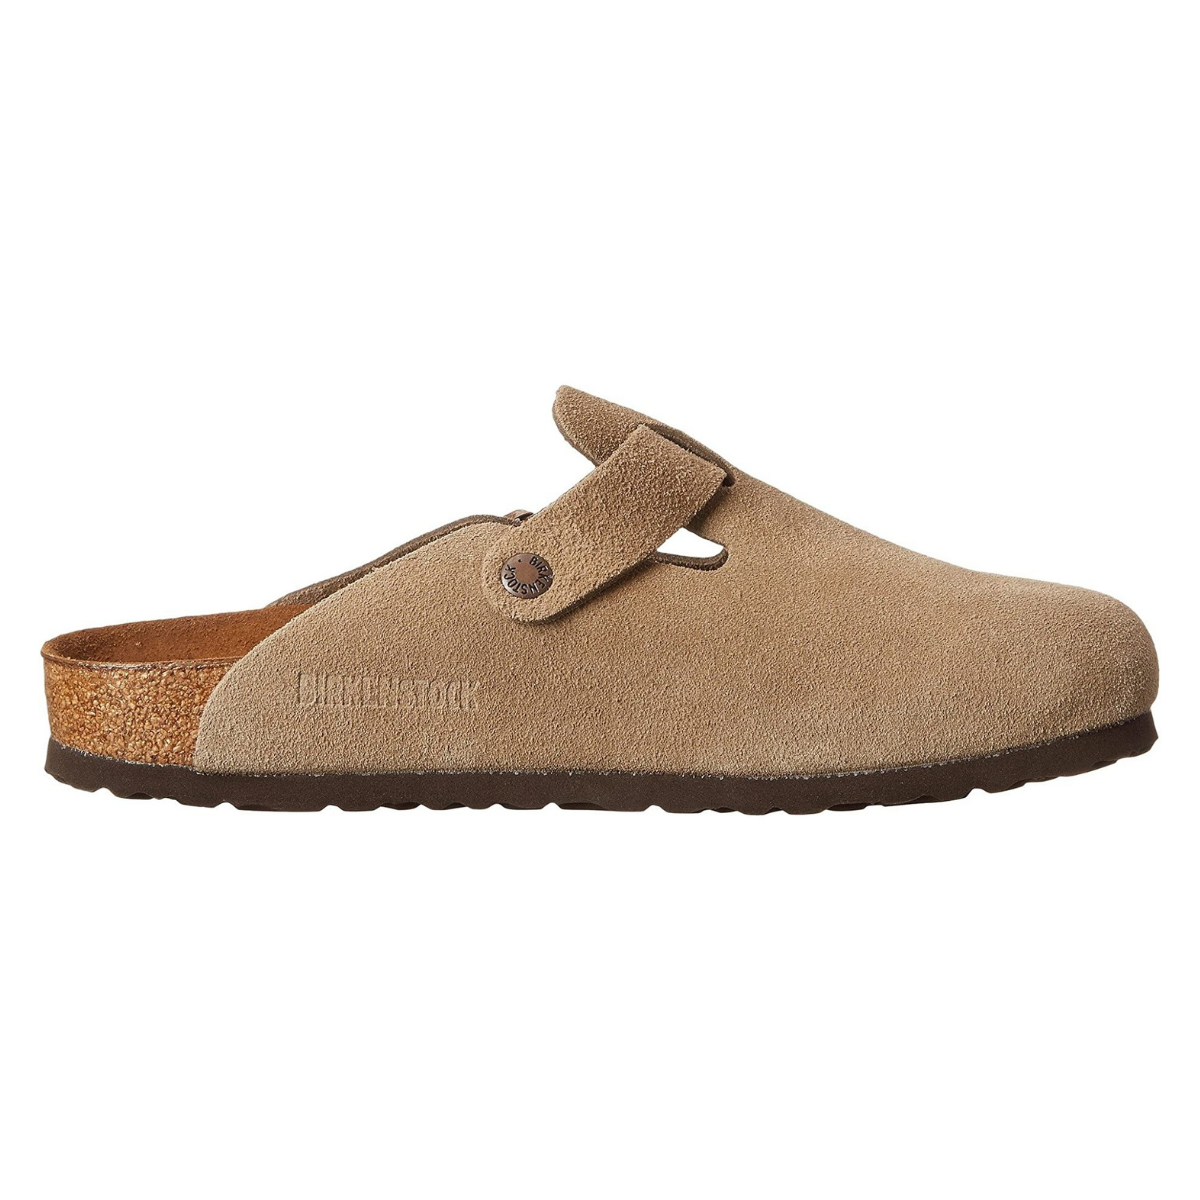 <p>There’s no guarantee that Birkenstock’s iconic Boston <a href="https://www.glamour.com/gallery/best-clogs-for-women?mbid=synd_msn_rss&utm_source=msn&utm_medium=syndication">clogs</a> will be included in the Anniversary Sale, but I’m holding out hope—it would cause quite a splash, since they keep selling out and don't need to go on sale. They’re unbelievably comfy and easy to style with jeans or shorts; I love the way the suede on my pair has aged, too. If you’re in the market for a replacement, keep an eye on Nordstrom this July. —<em>Jake Smith, commerce writer</em></p> <p><em>Save even more when you shop the Nordstrom Anniversary Sale with these <a href="https://www.glamour.com/coupons/nordstrom?mbid=synd_msn_rss&utm_source=msn&utm_medium=syndication">Nordstrom promo codes</a>.</em></p> $158, Nordstrom. <a href="https://www.nordstrom.com/s/birkenstock-boston-soft-footbed-clog-women/3339203">Get it now!</a><p>Sign up for today’s biggest stories, from pop culture to politics.</p><a href="https://www.glamour.com/newsletter/news?sourceCode=msnsend">Sign Up</a>